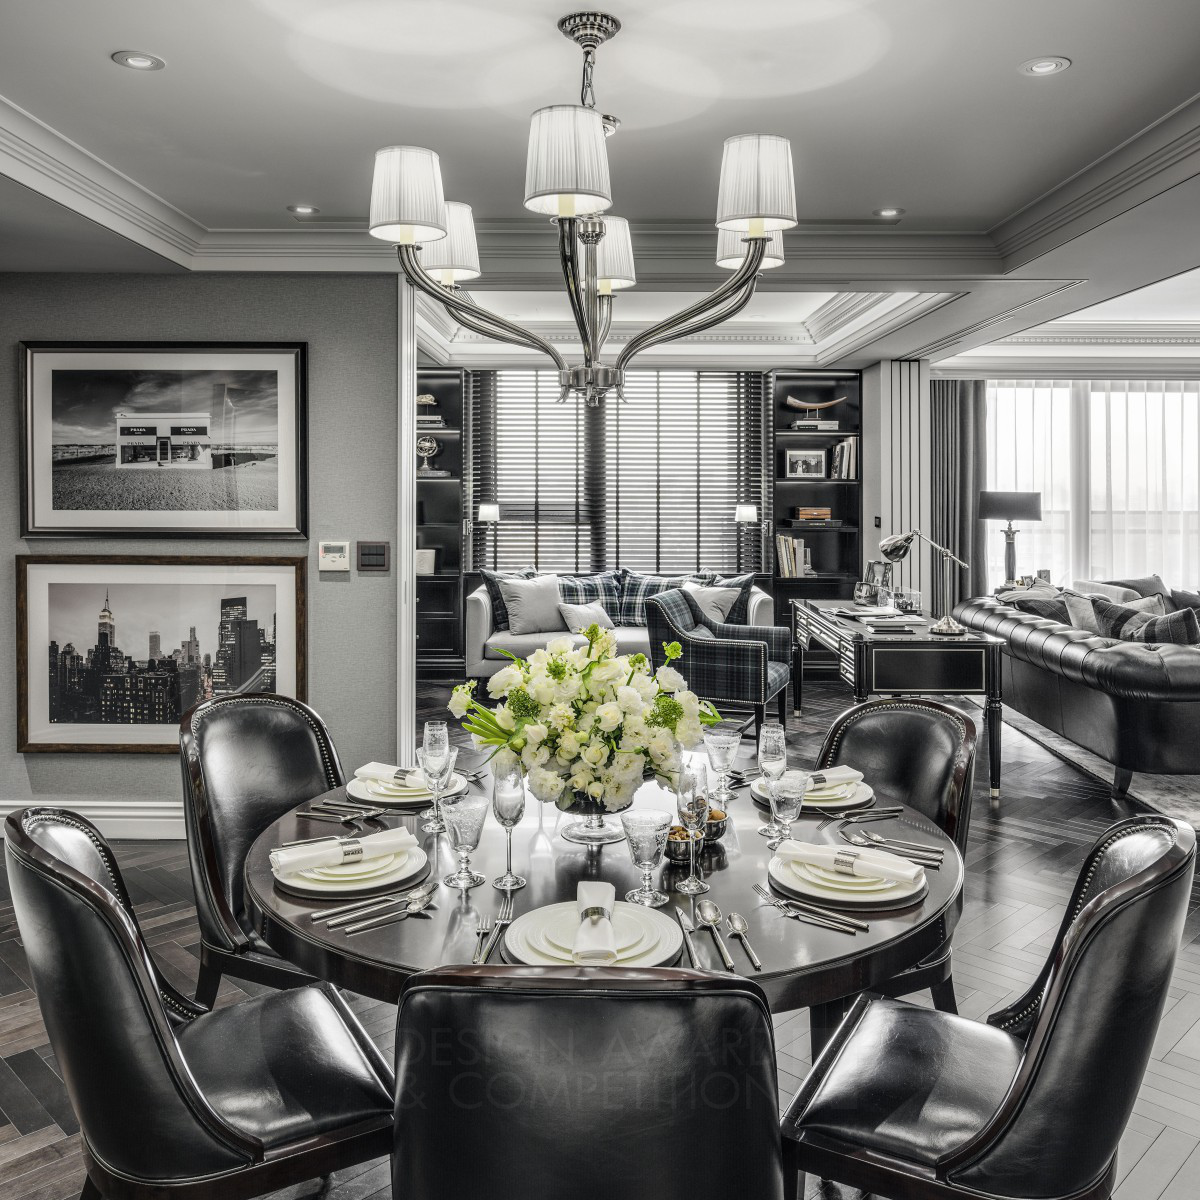 Idan Chiang of L'atelier Fantasia wins Silver at the prestigious A' Interior Space, Retail and Exhibition Design Award with Classic Timeless Bachelor Pad Luxury Residential.